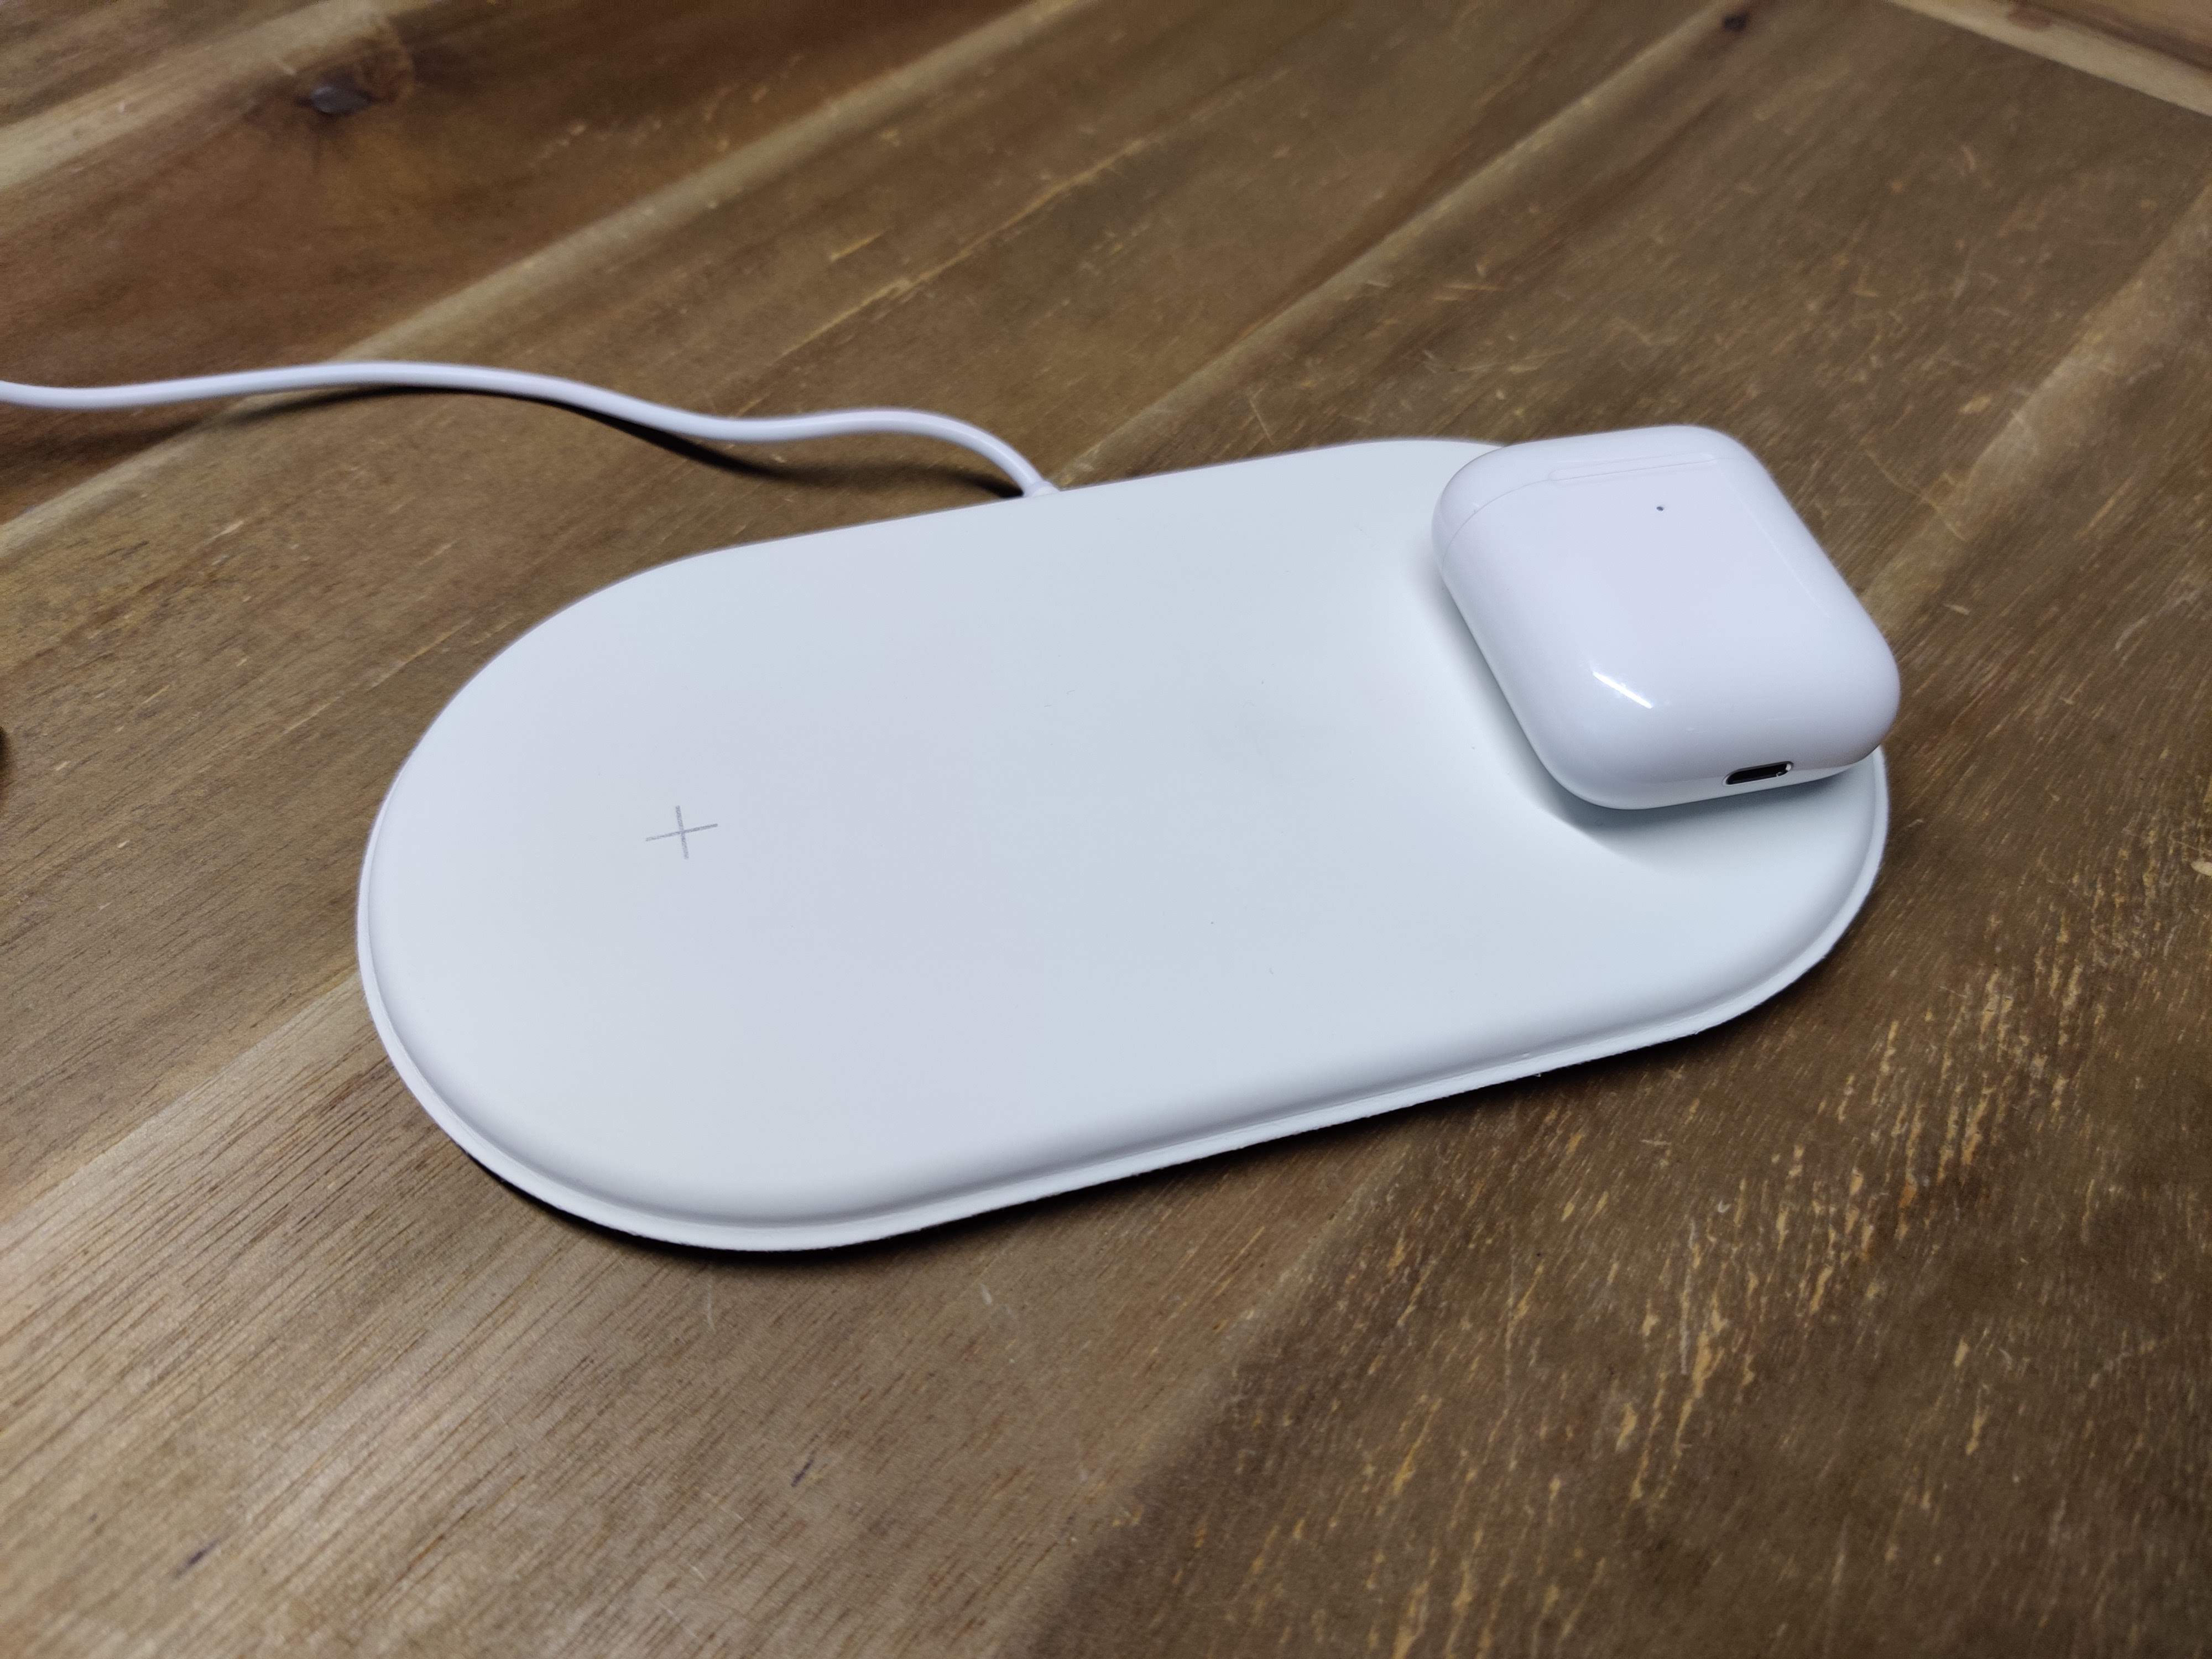 This  AirPower knockoff is available for order now